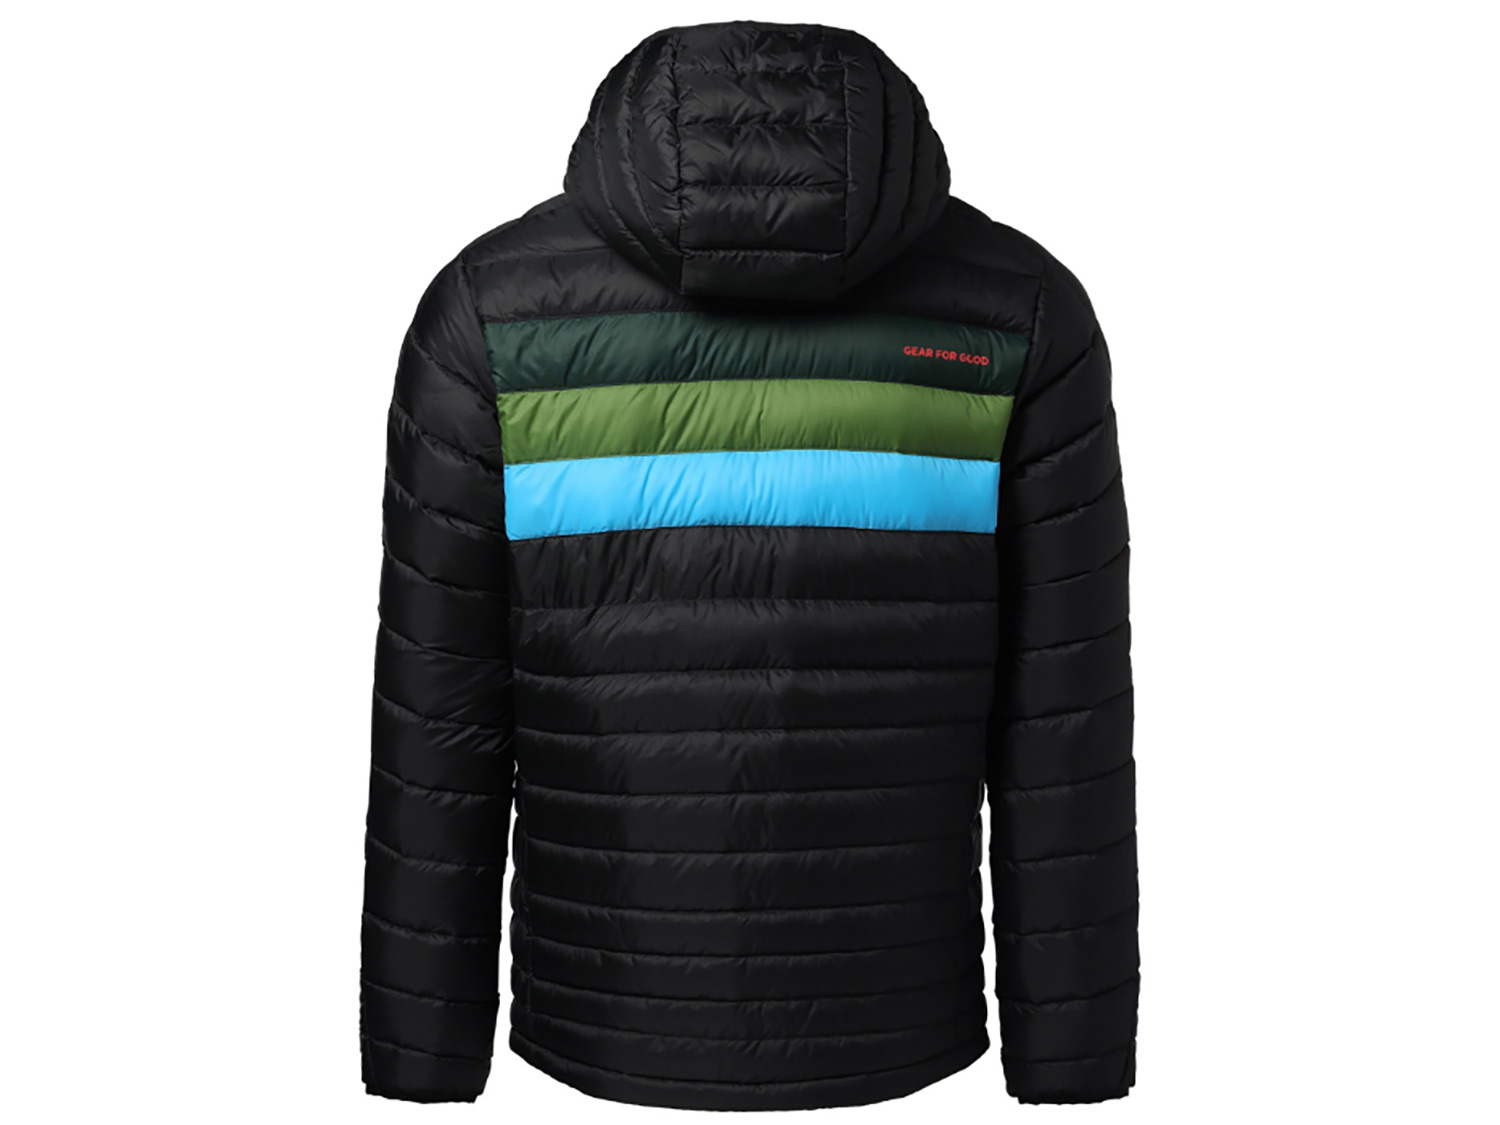 Cotopaxi Fuego Hooded Down Jacket is one of the best down puffer jackets.